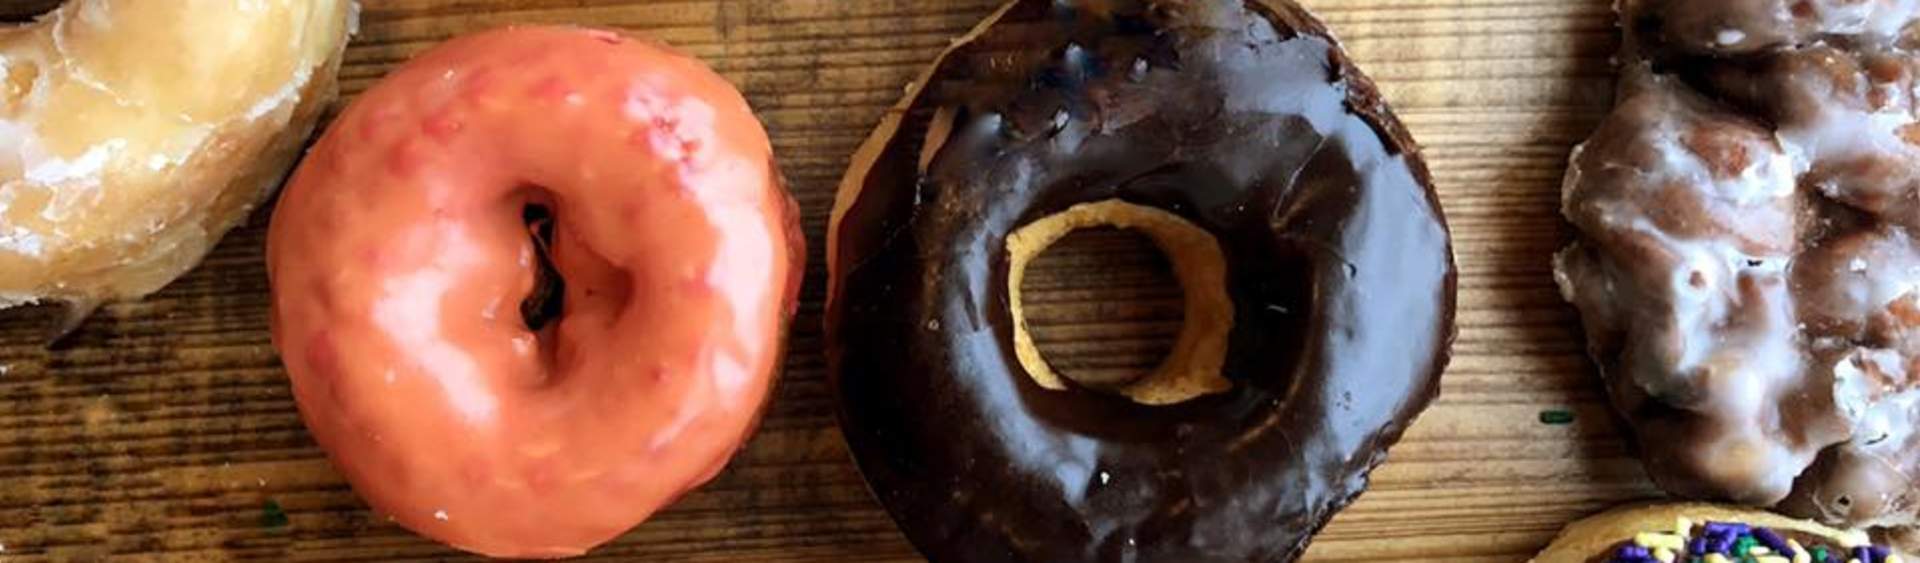 Donut and Go - Donut and Coffee Trail